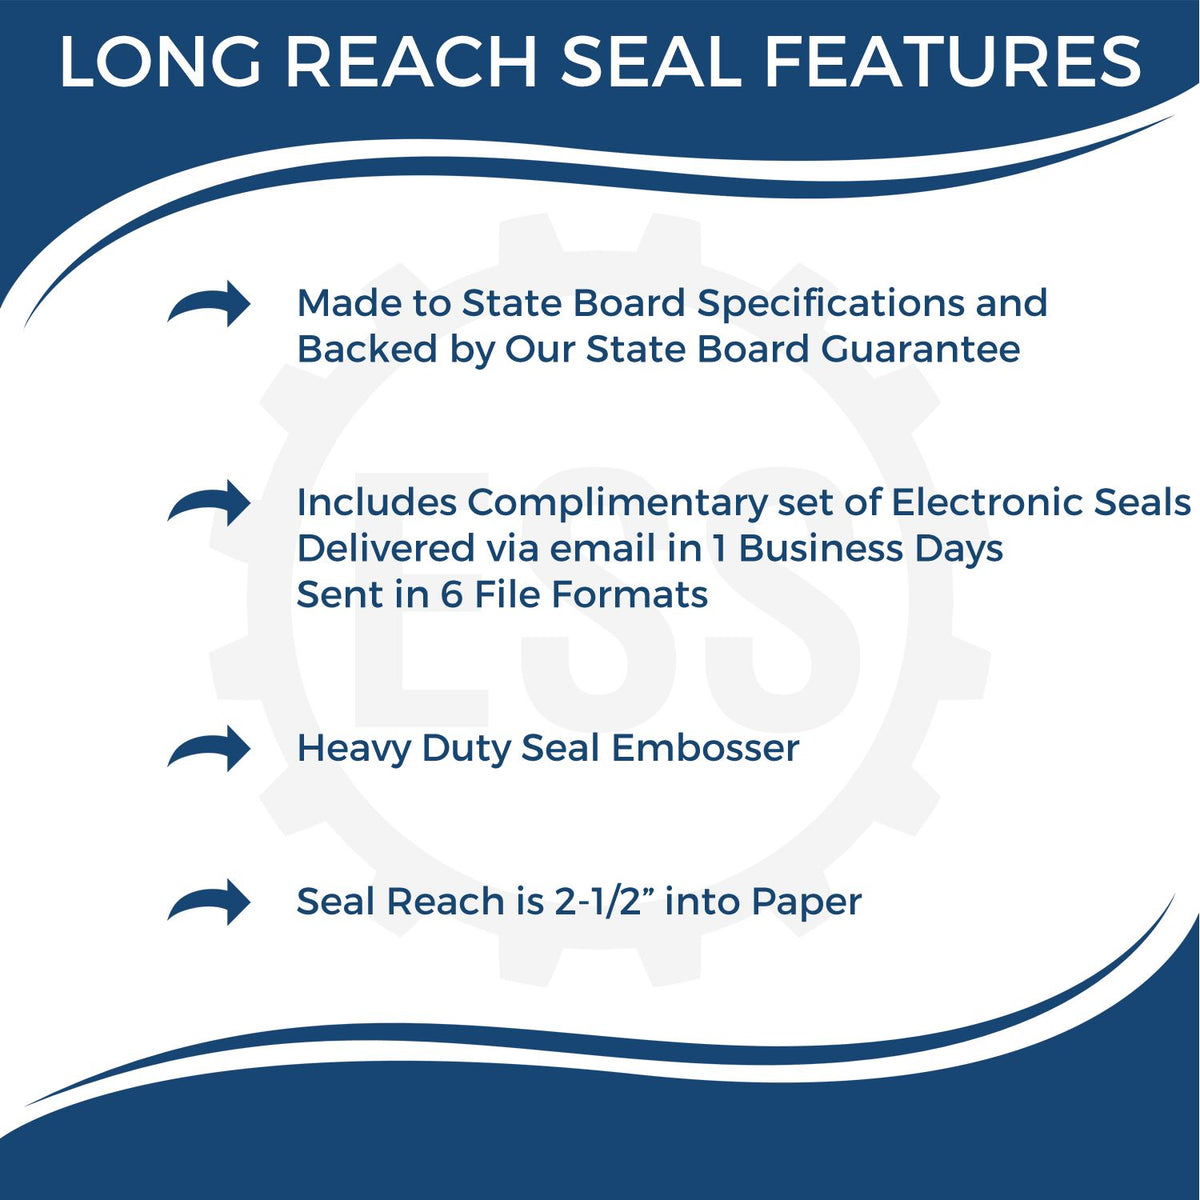 A picture of an infographic highlighting the selling points for the Long Reach North Carolina Geology Seal